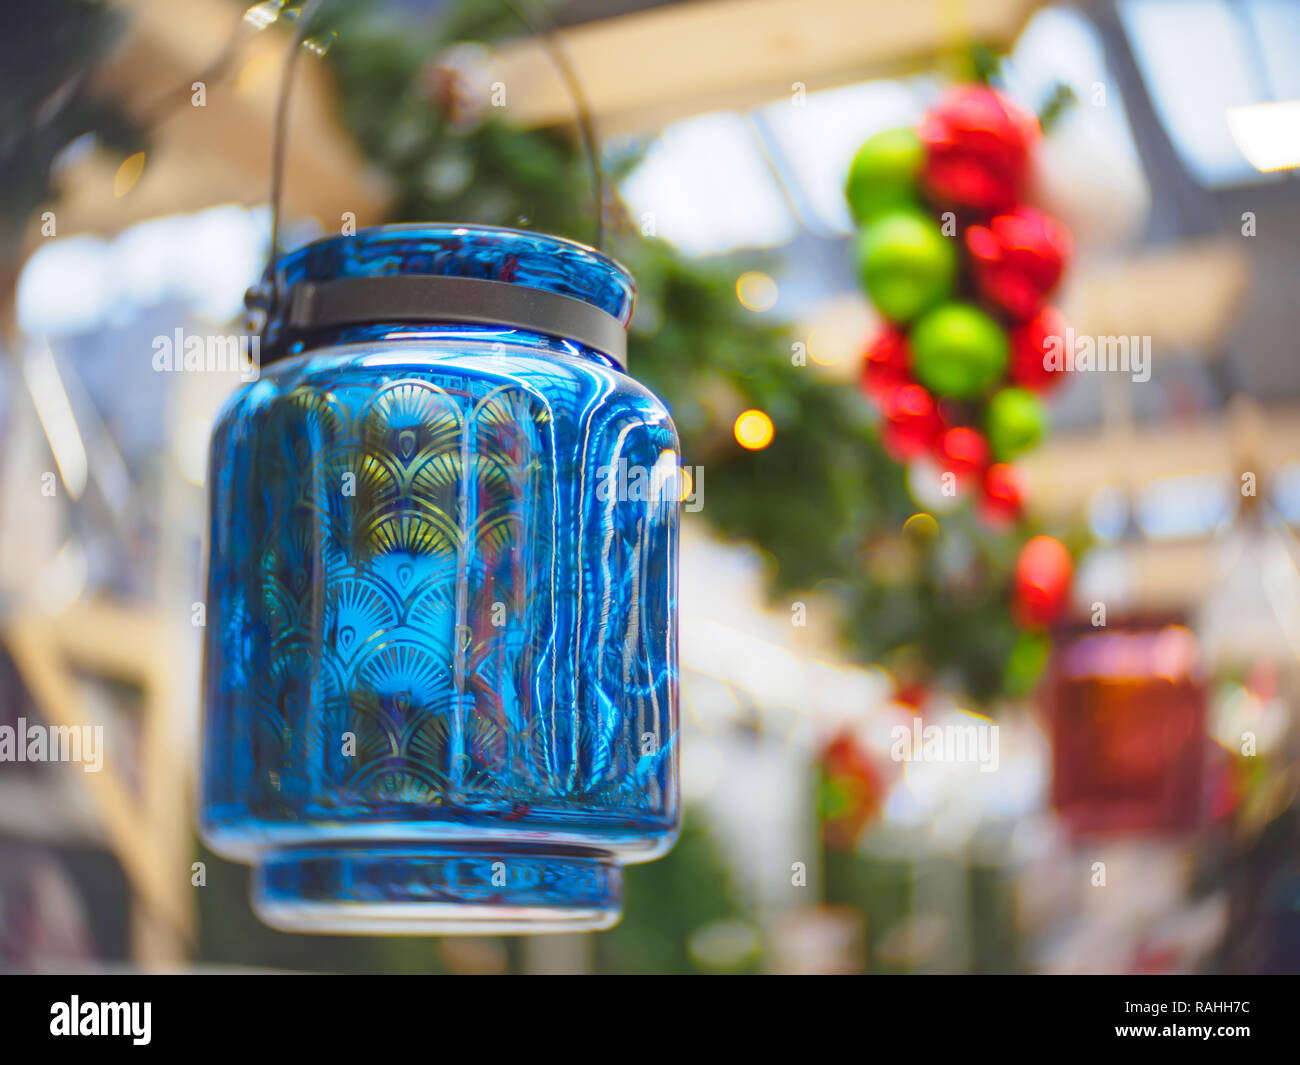 Christmas and New Year festive soft-focused background with fish-eye effect applied. Stock Photo